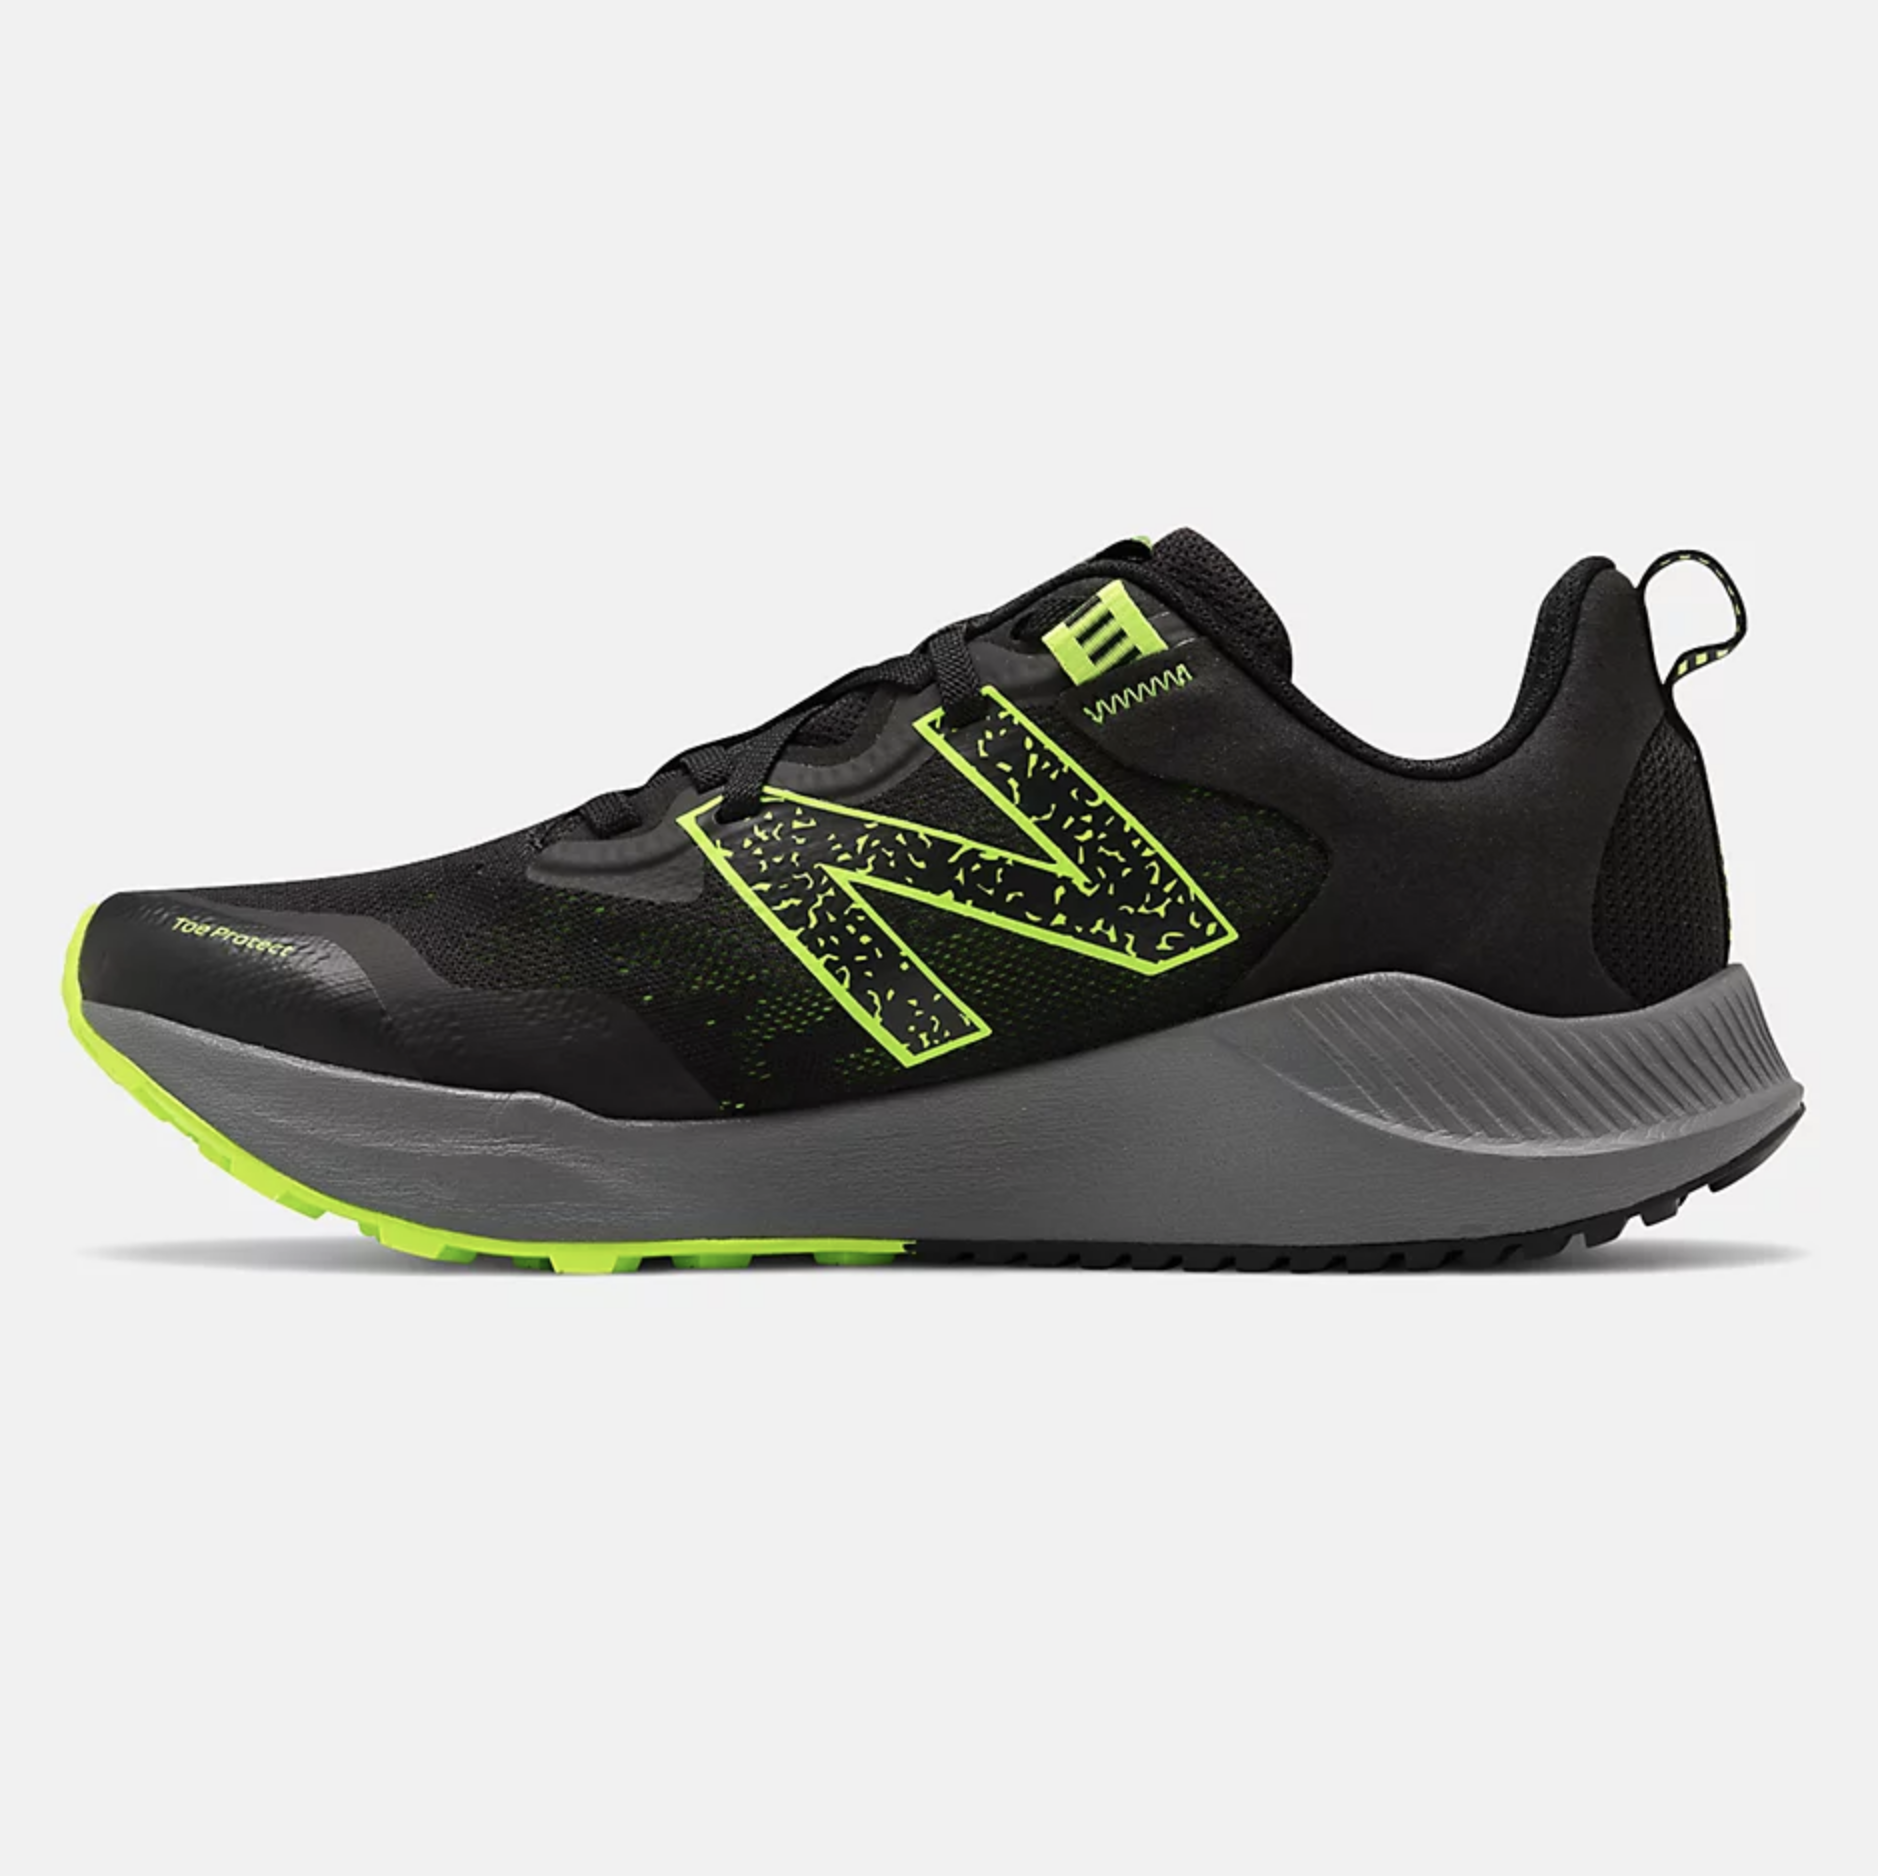 The Best Deals on New Balance Shoes 